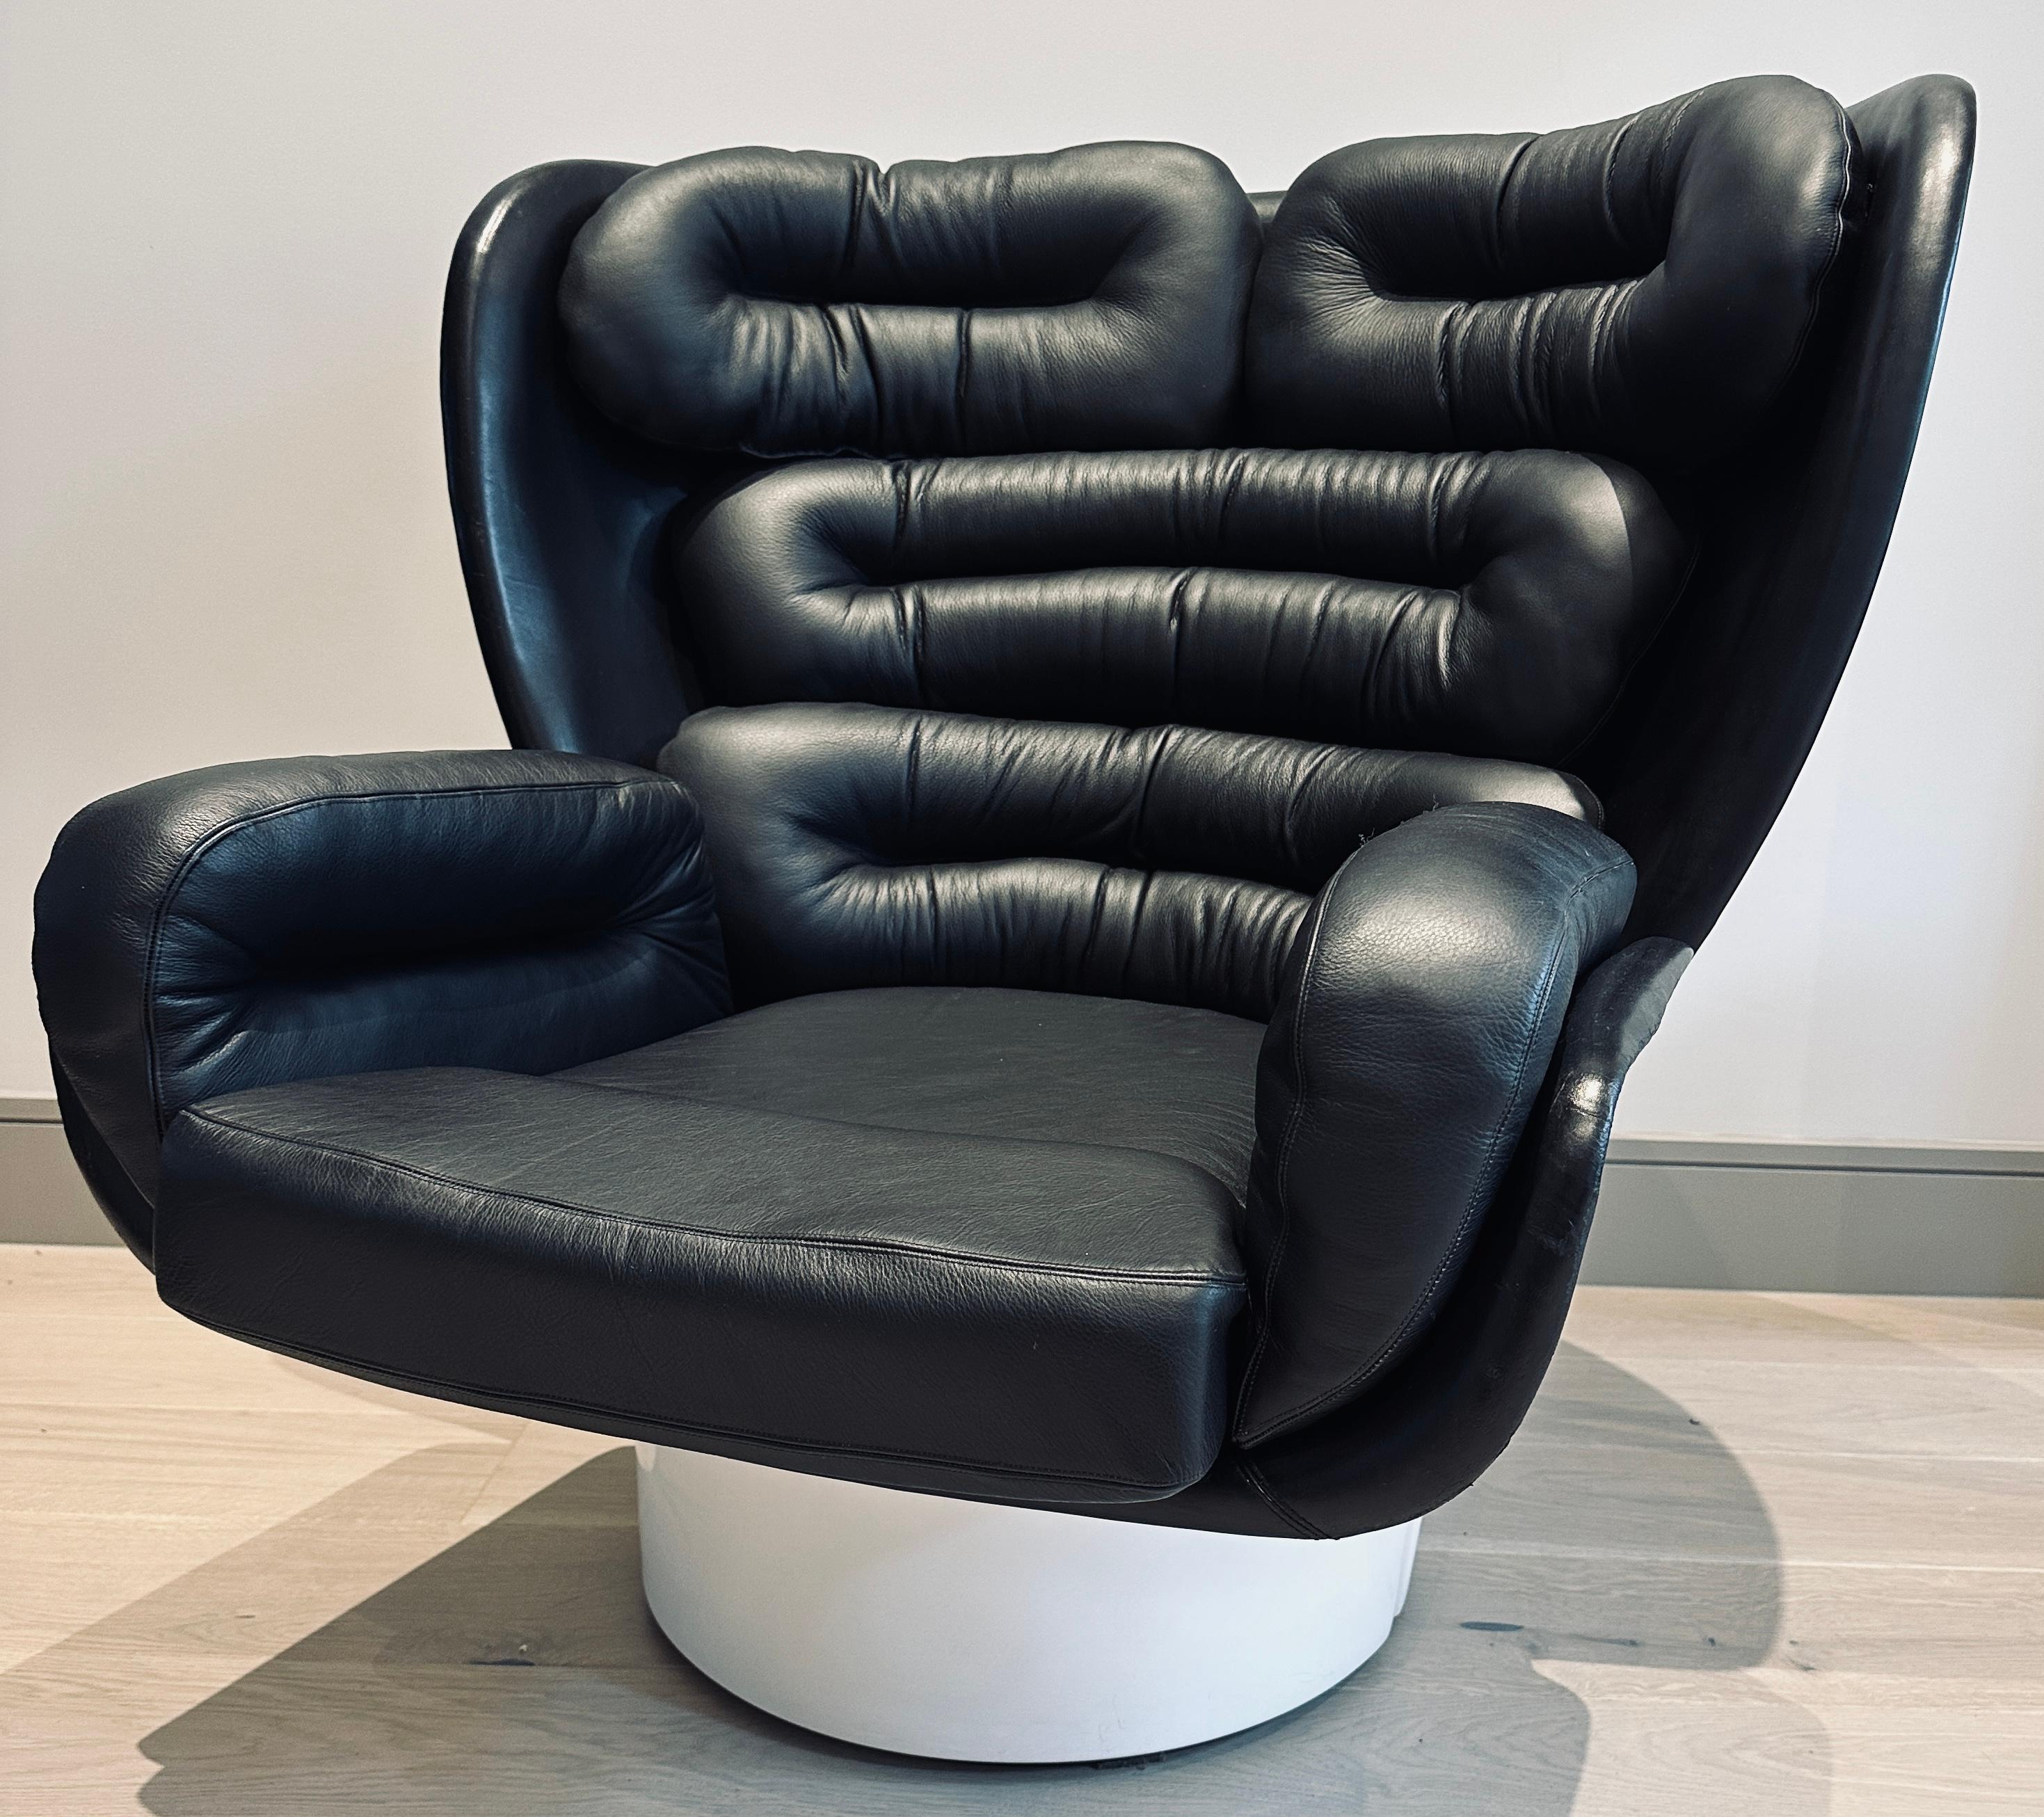 An Iconic 1960s Italian 'Elda' swivel lounge chair designed by Joe Colombo in 1963 (1930-1971 ) and manufactured by Comfort Italy. This is one of the most well-known, space-age and futuristic designs from this innovative and forward-thinking Italian